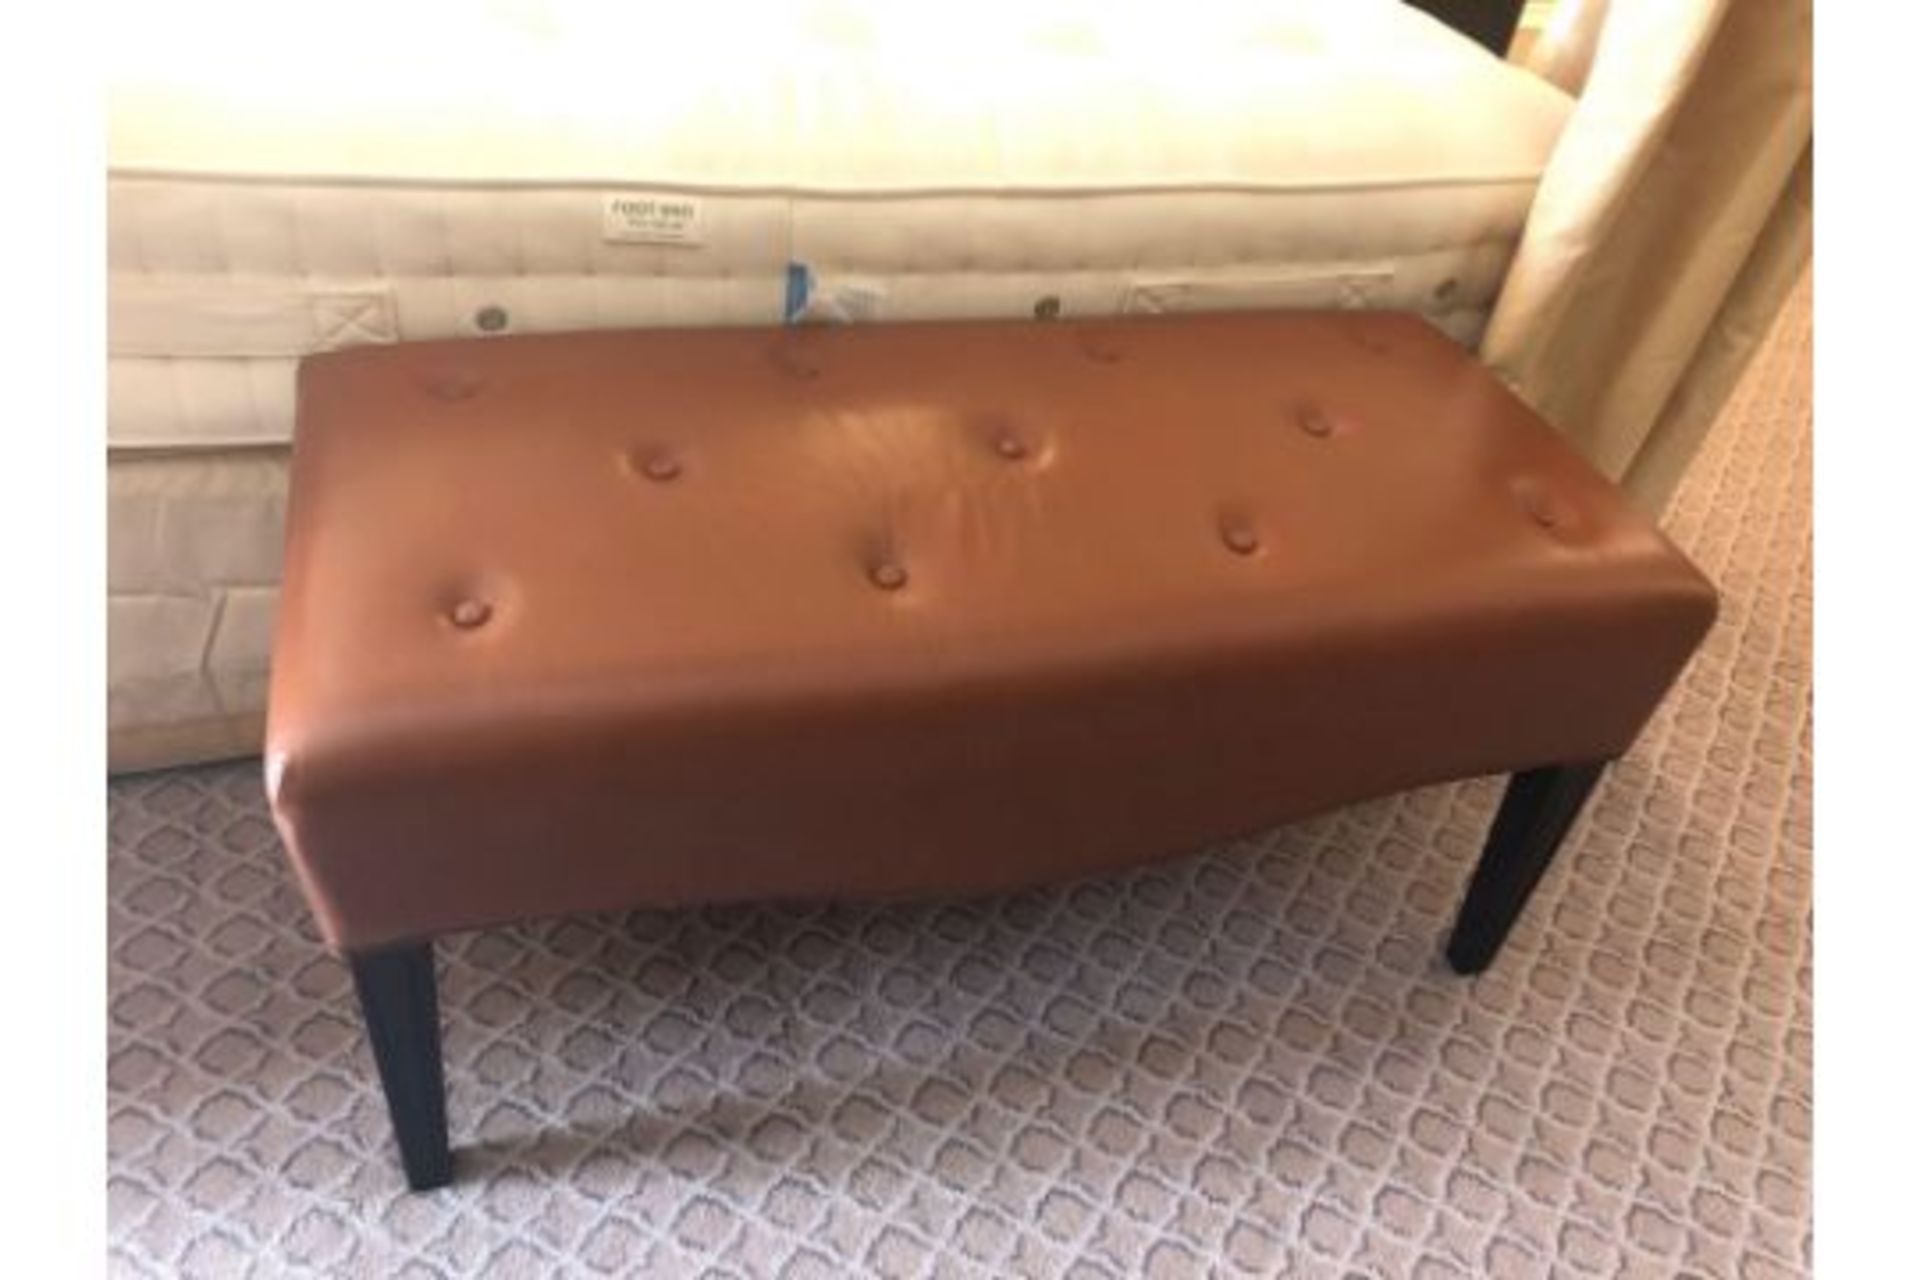 Tufted Leather Bench With Scrolled Apron 100 x 46 x 47cm (Room 130)